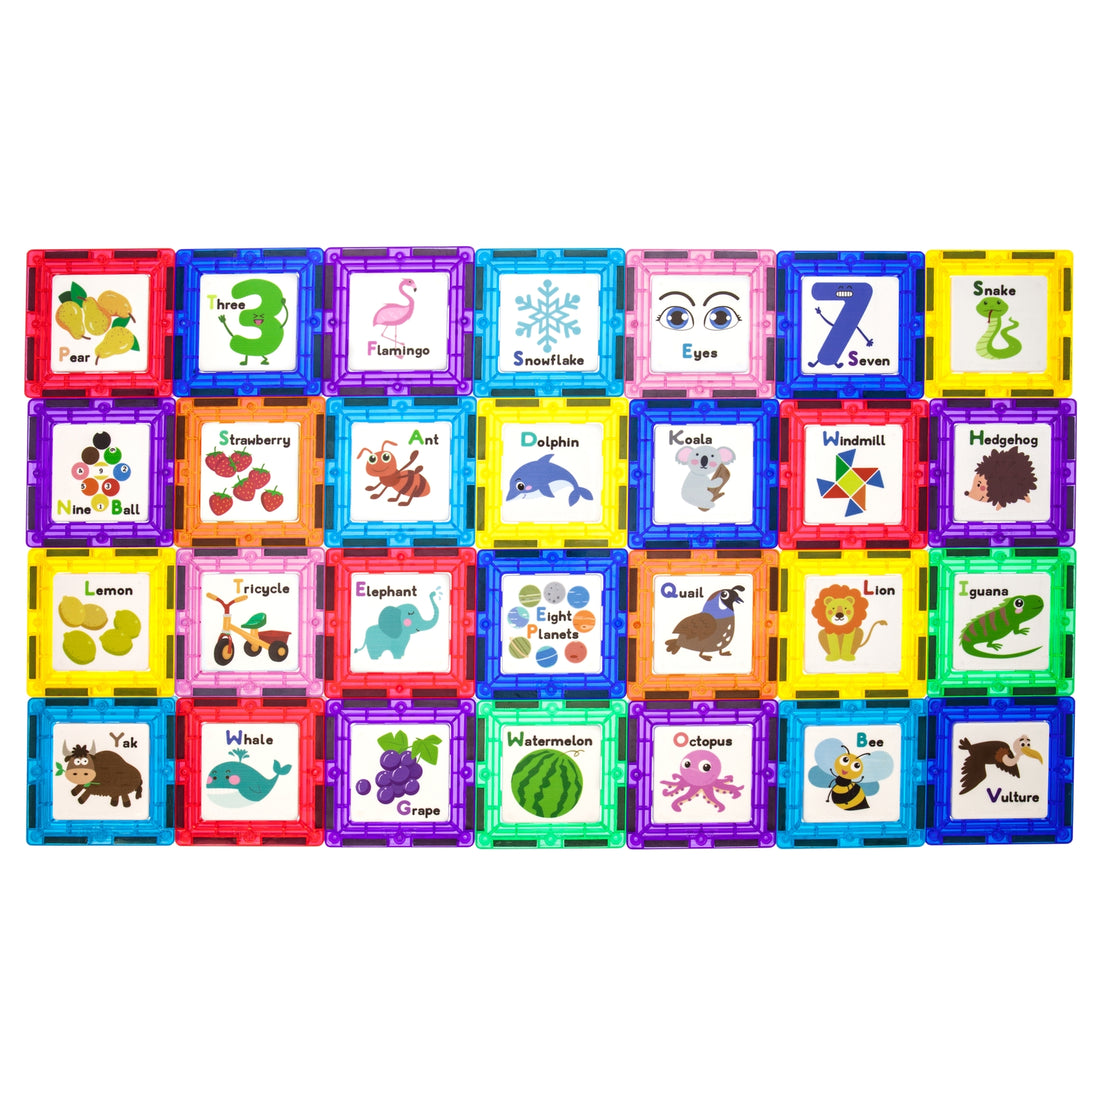 56 Piece Magnetic Tileset with Artwork